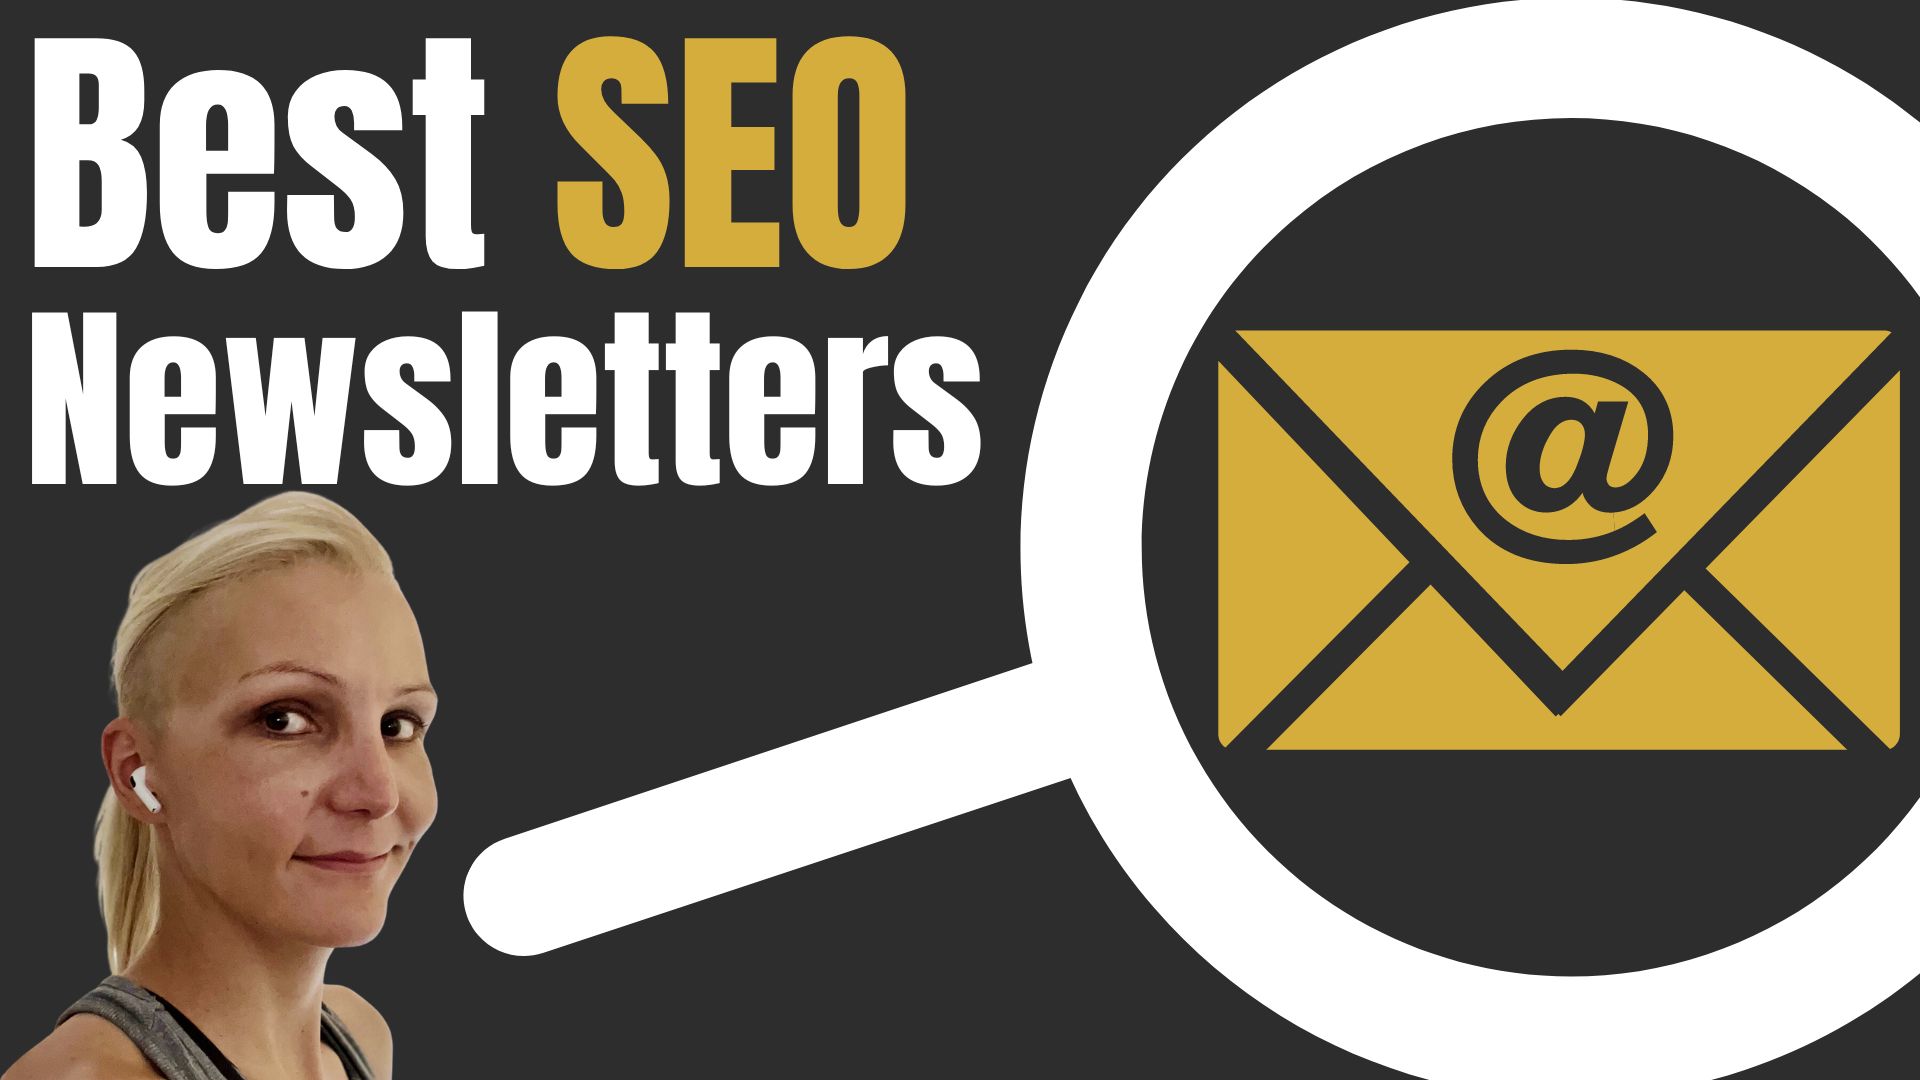 Best SEO Newsletters List (Top 40) To Learn SEO From